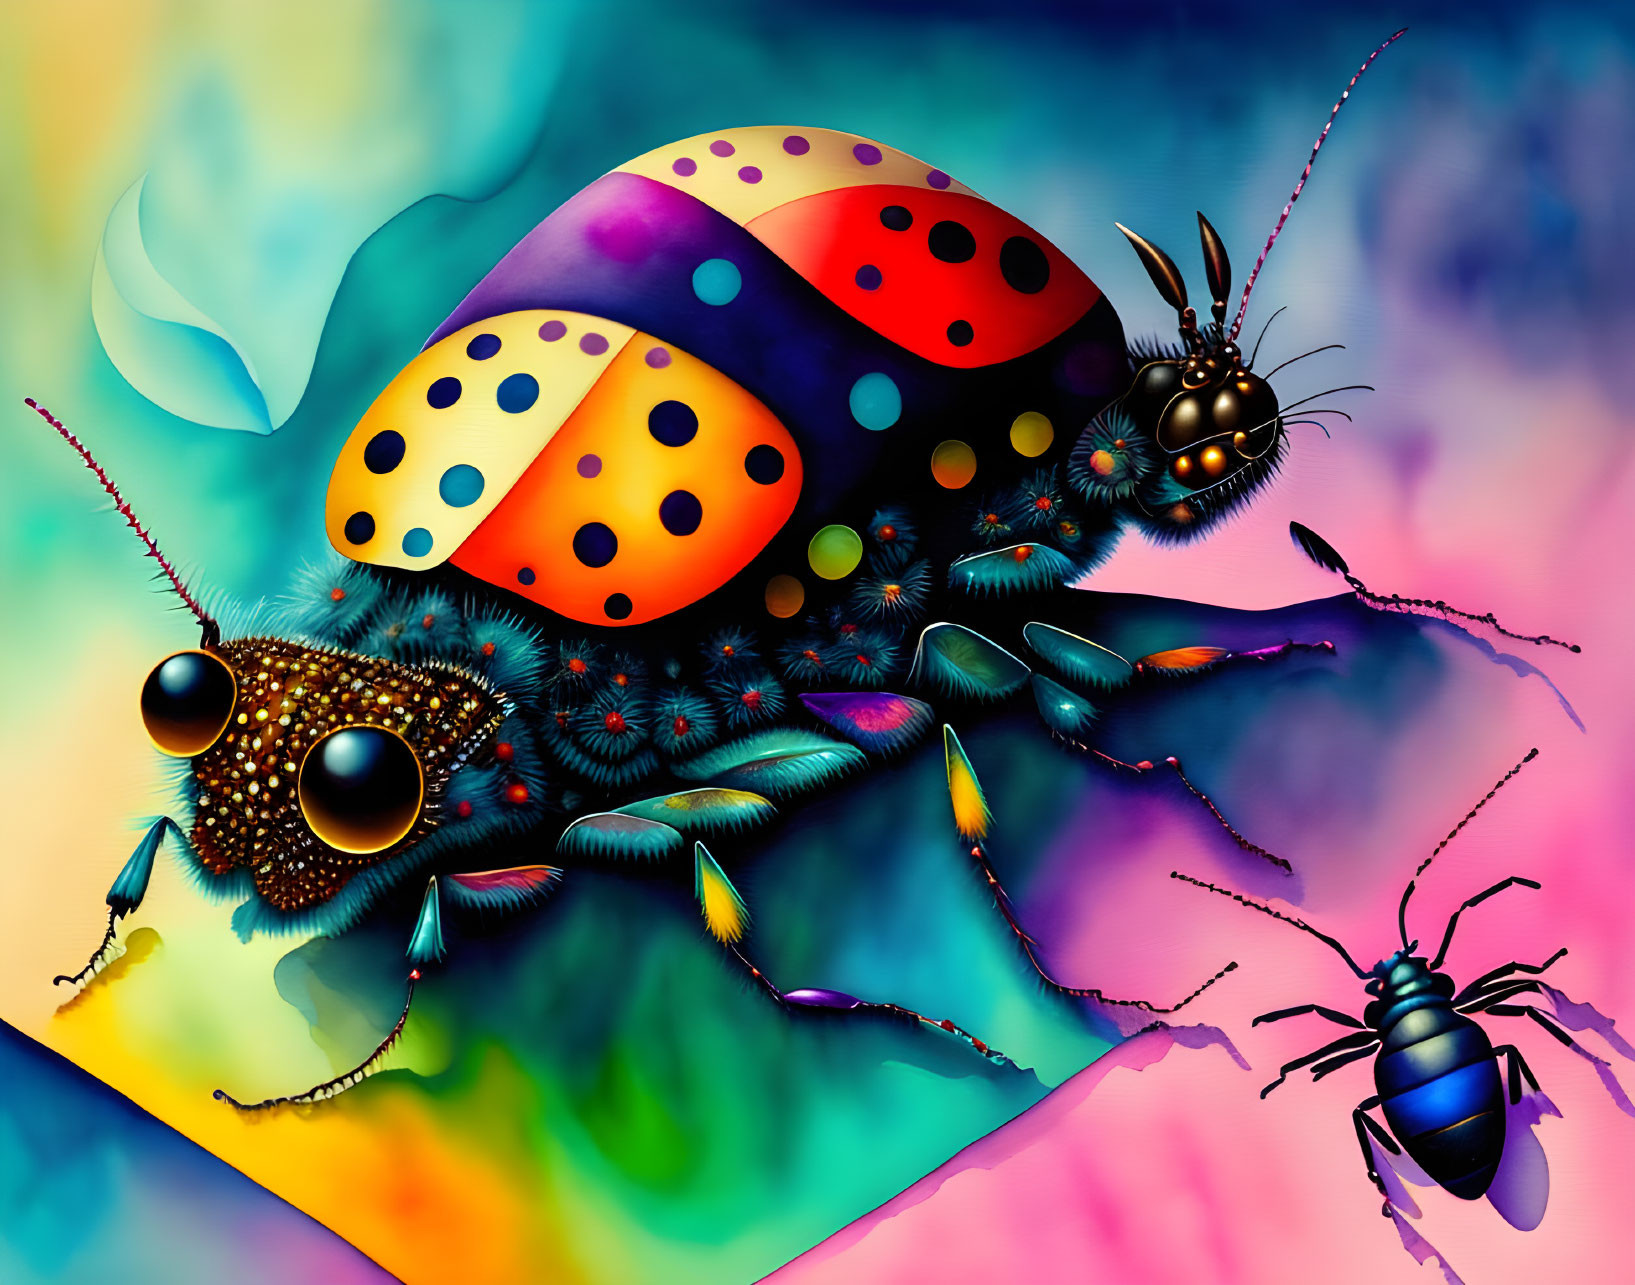 Vibrant oversized ladybug with polka dots and smaller black insect on psychedelic background